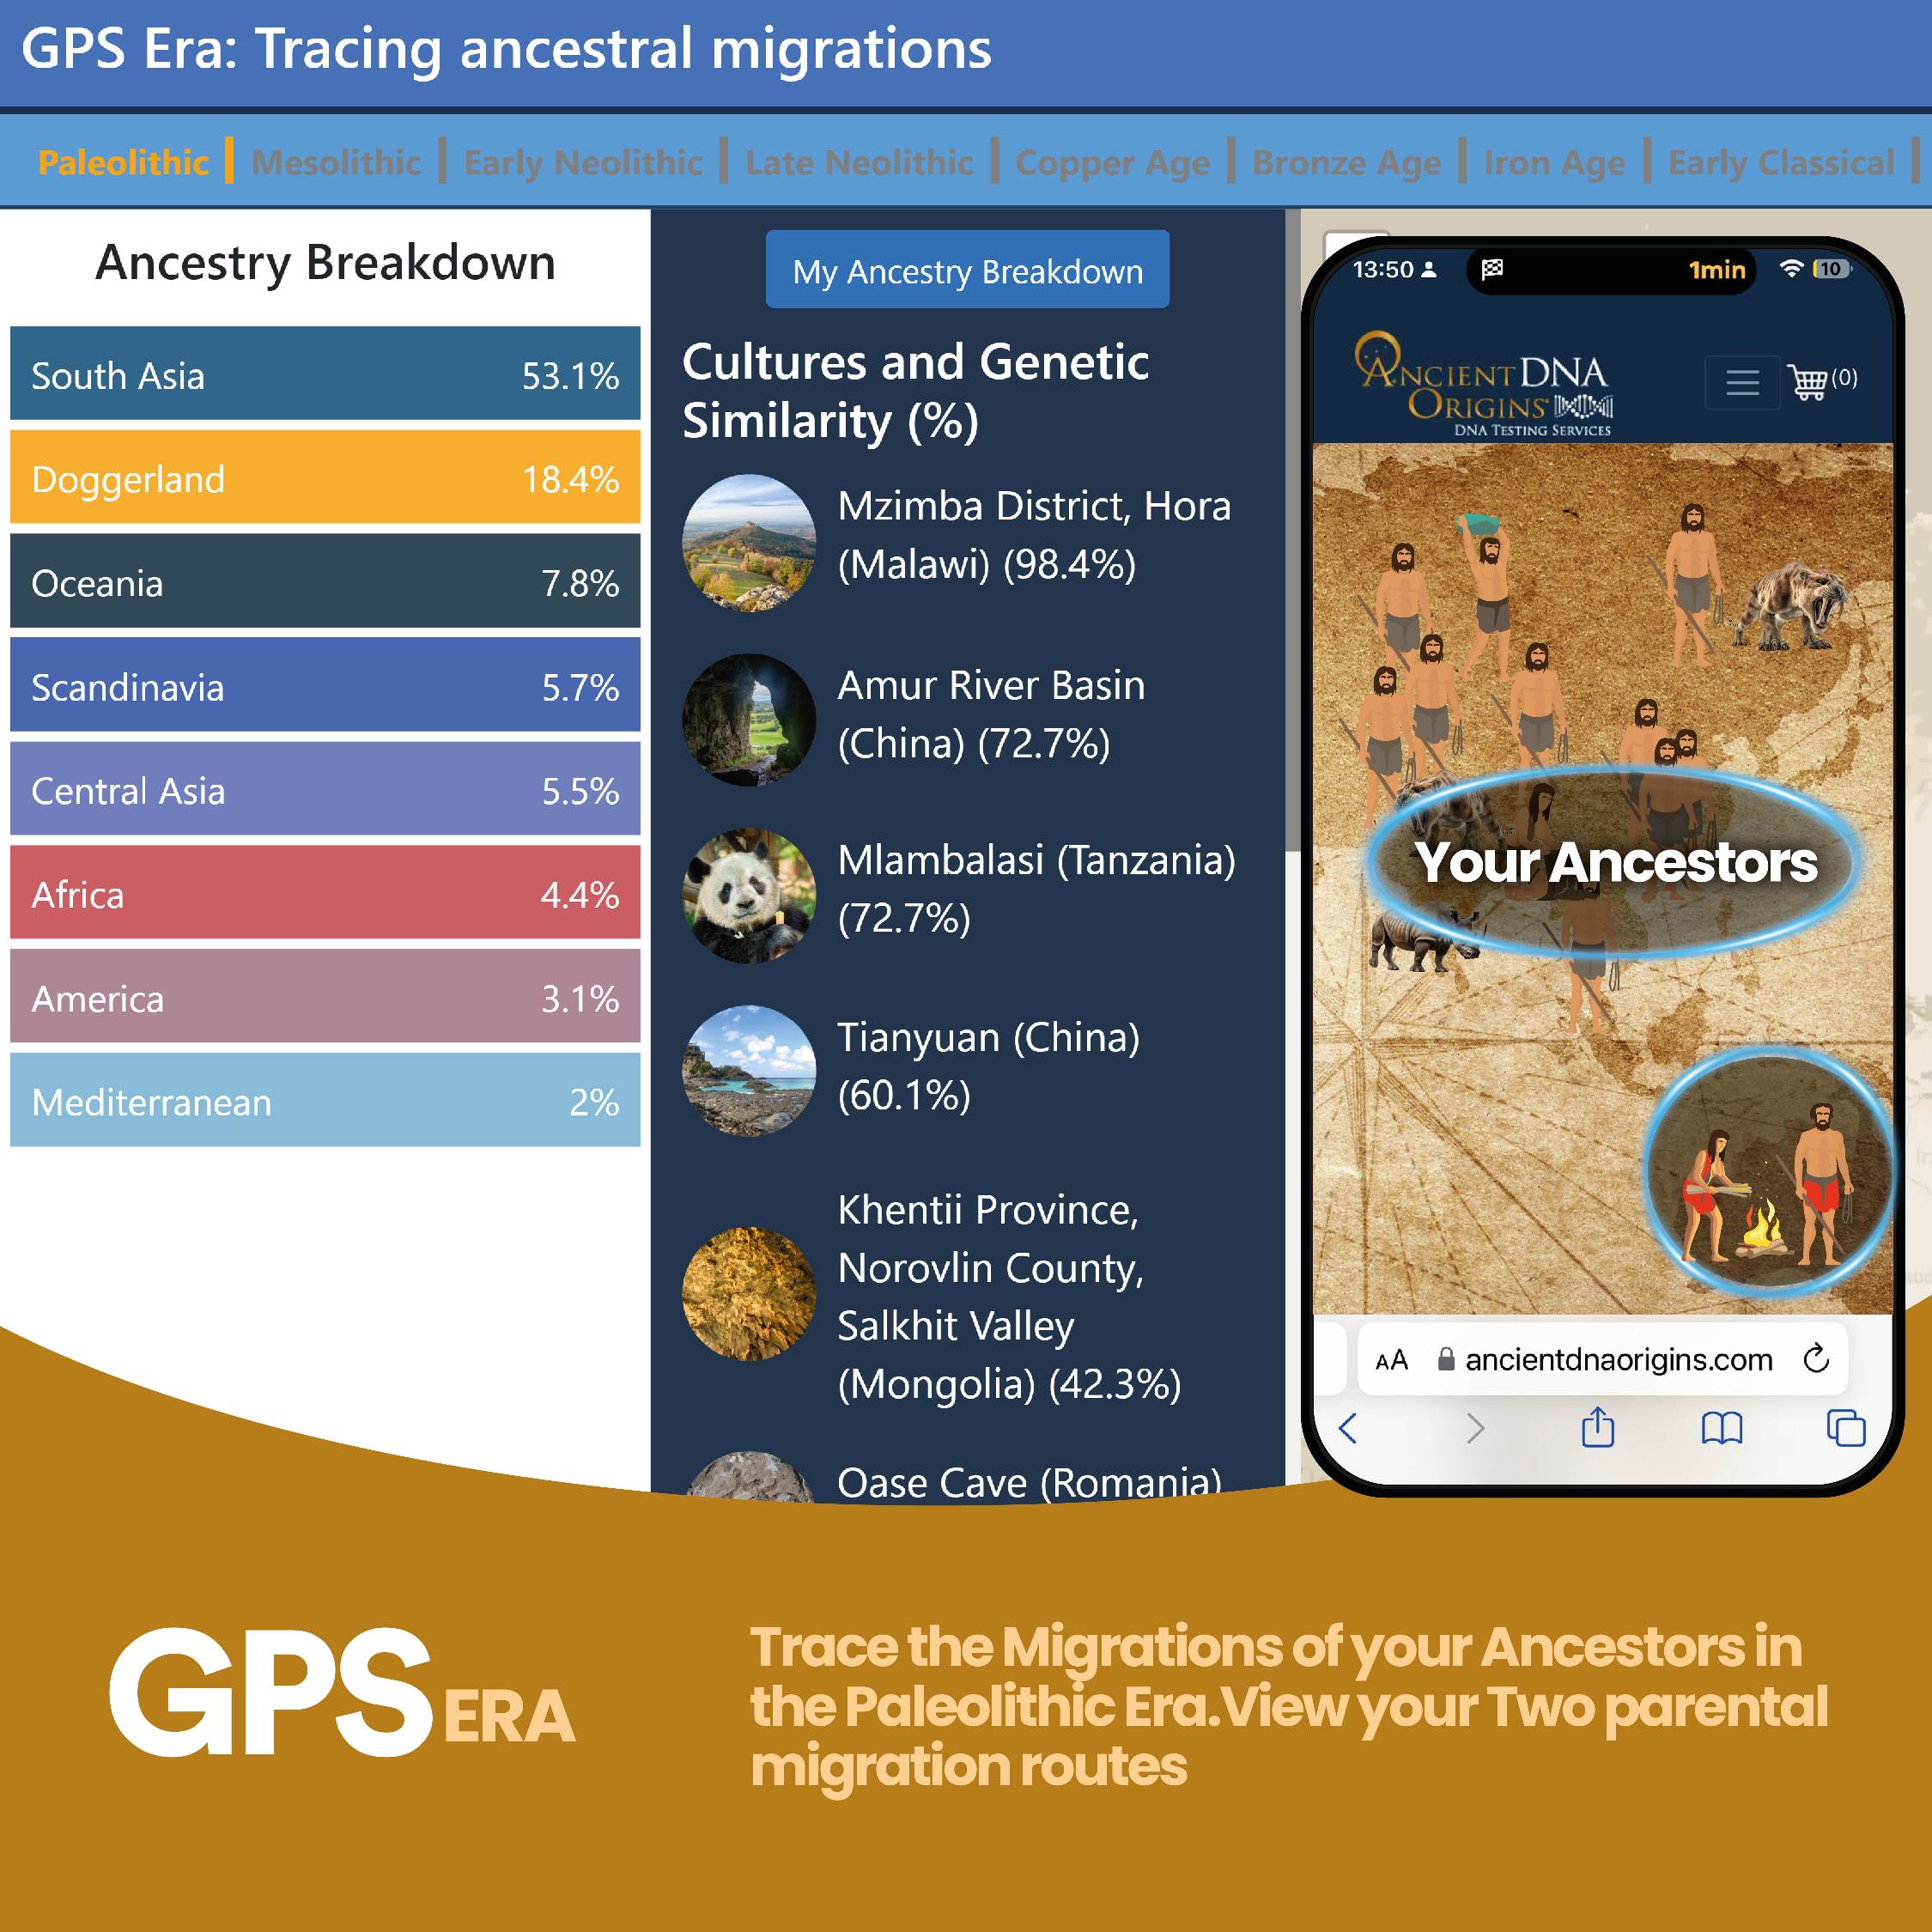 Trace the migration routes of your Paleolithic ancestors and view your two parental lines